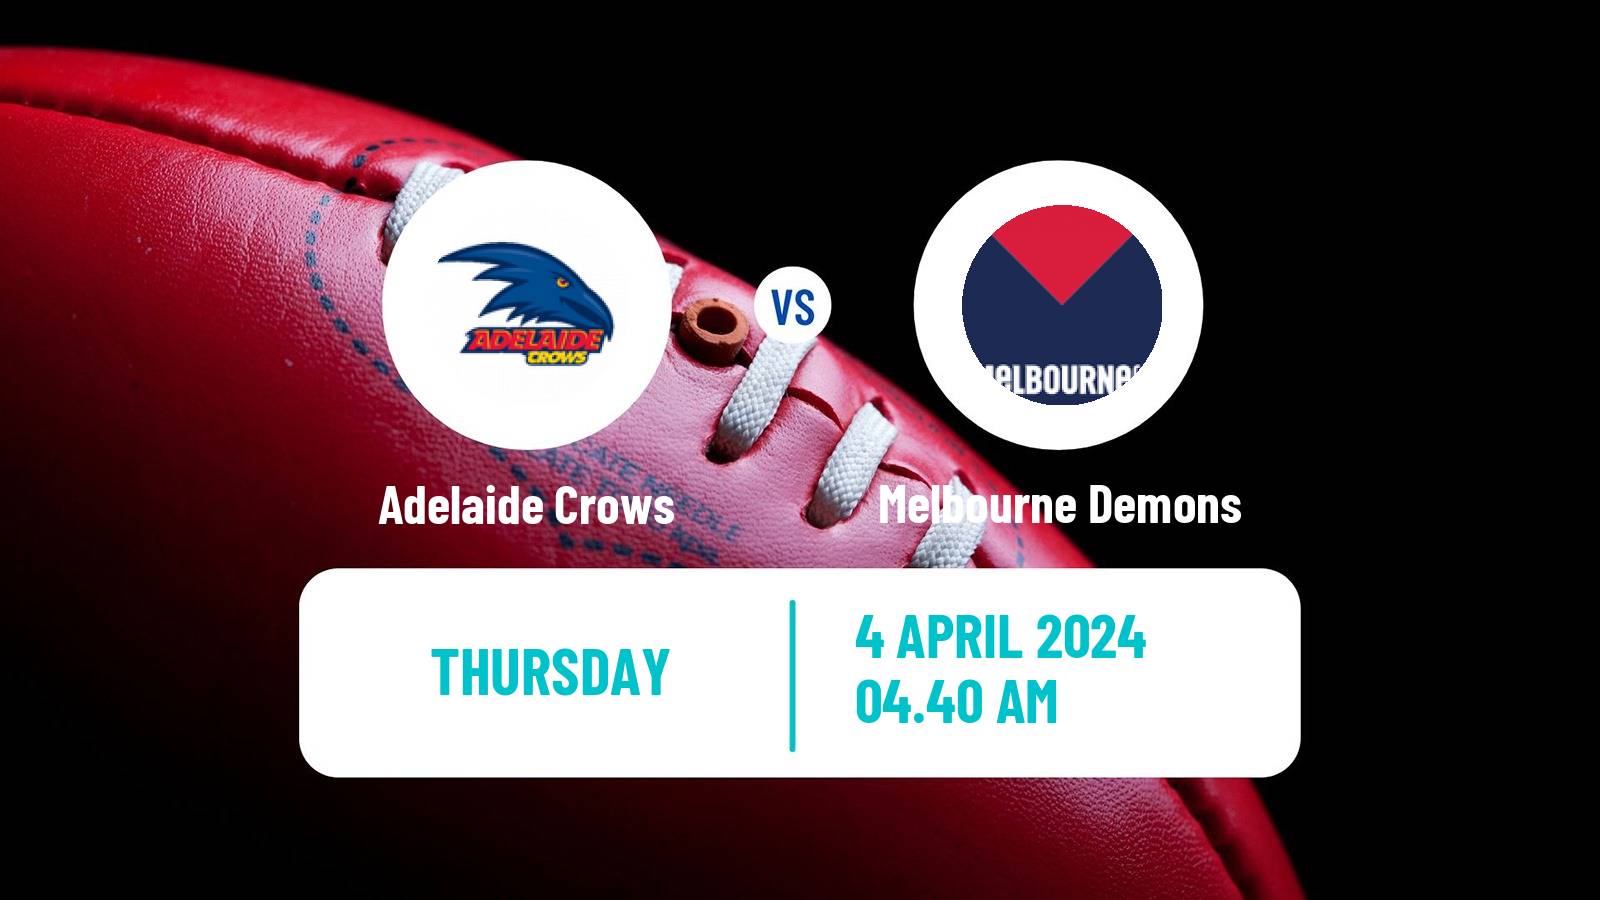 Aussie rules AFL Adelaide Crows - Melbourne Demons